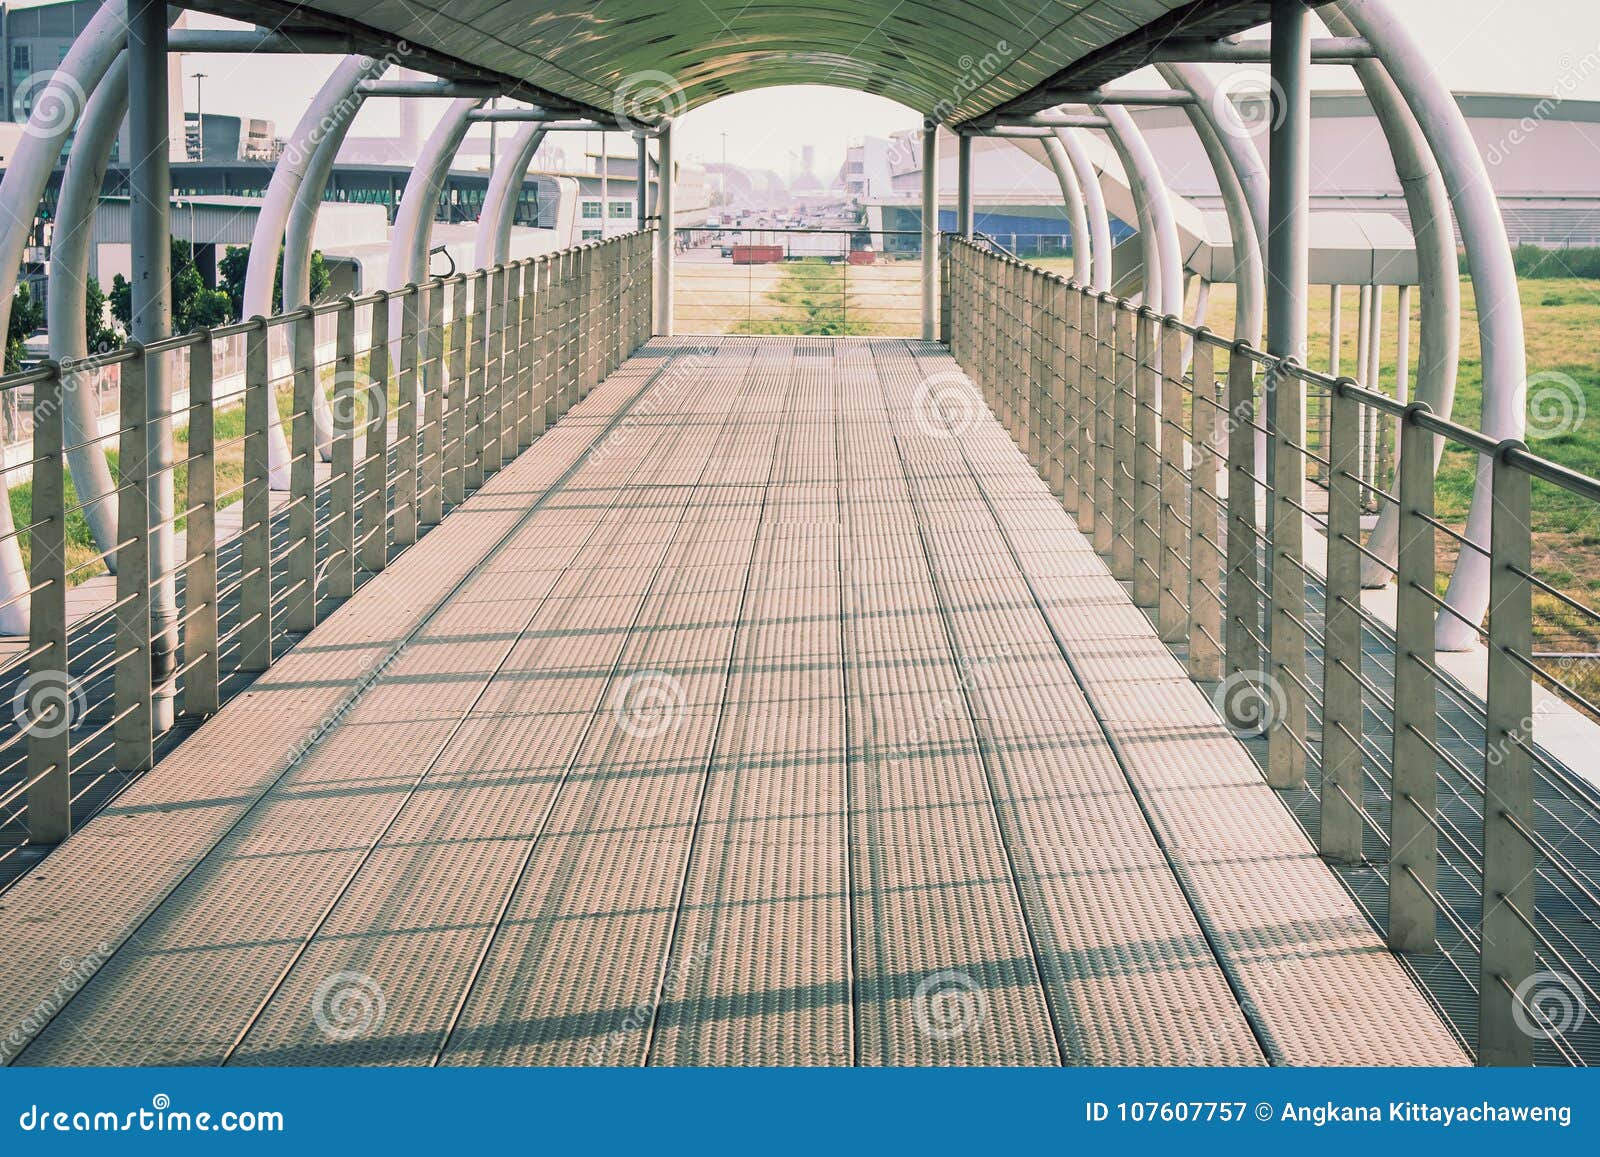 architecture of footbridges or walkway for walking overpass cross over the road.